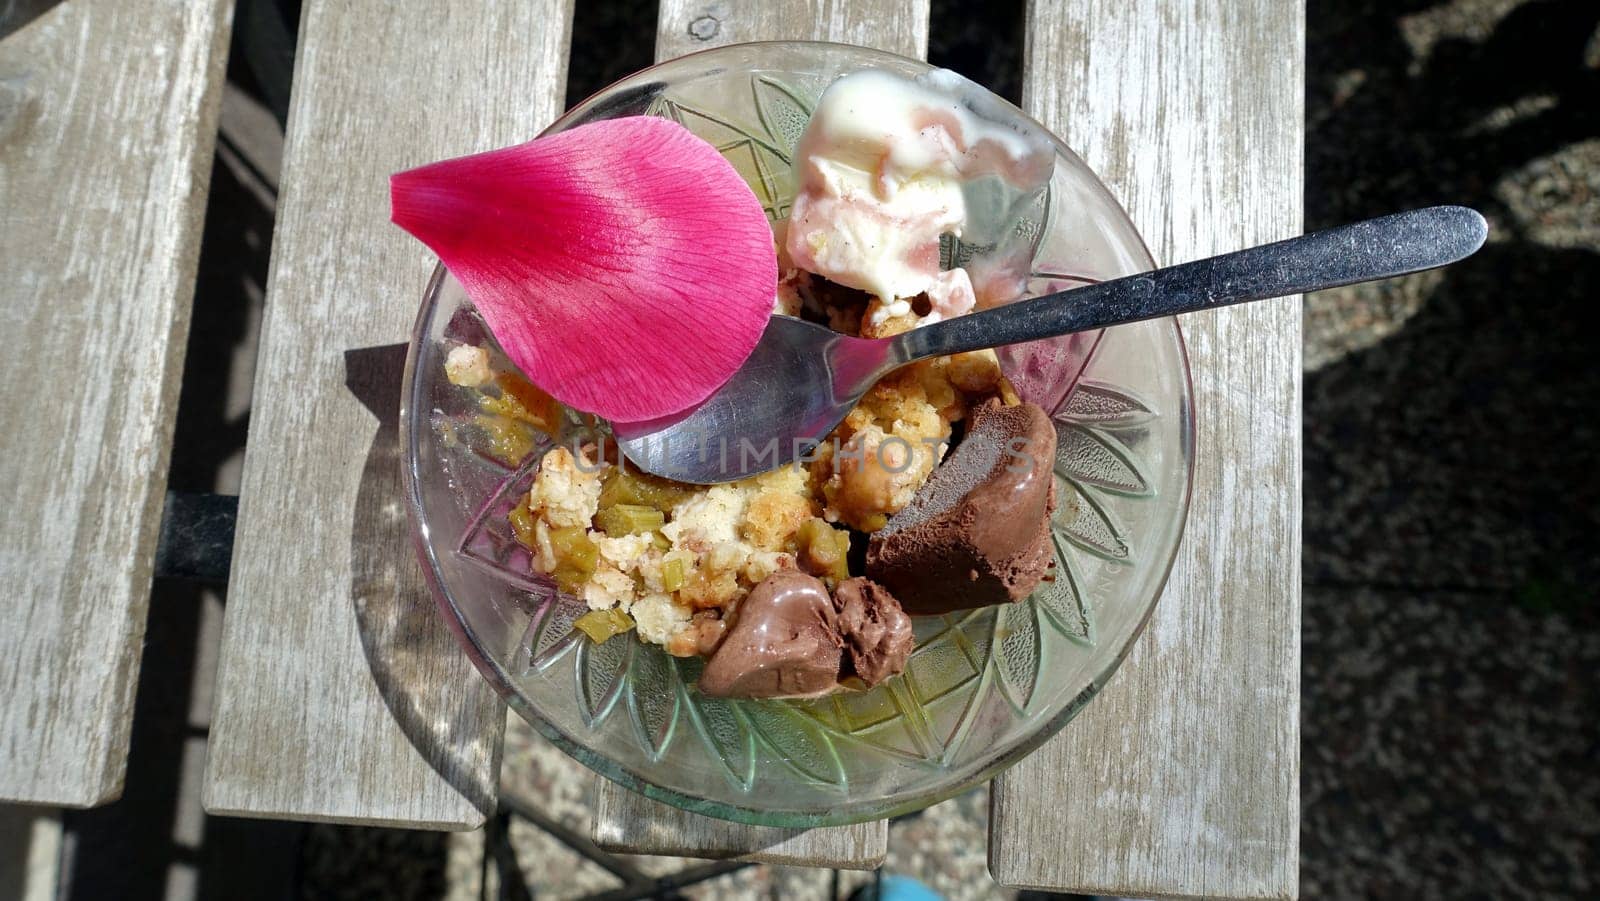 A cup of mixed ice cream with rhubarb, vanilla and chocolate decorated with a flower petal.